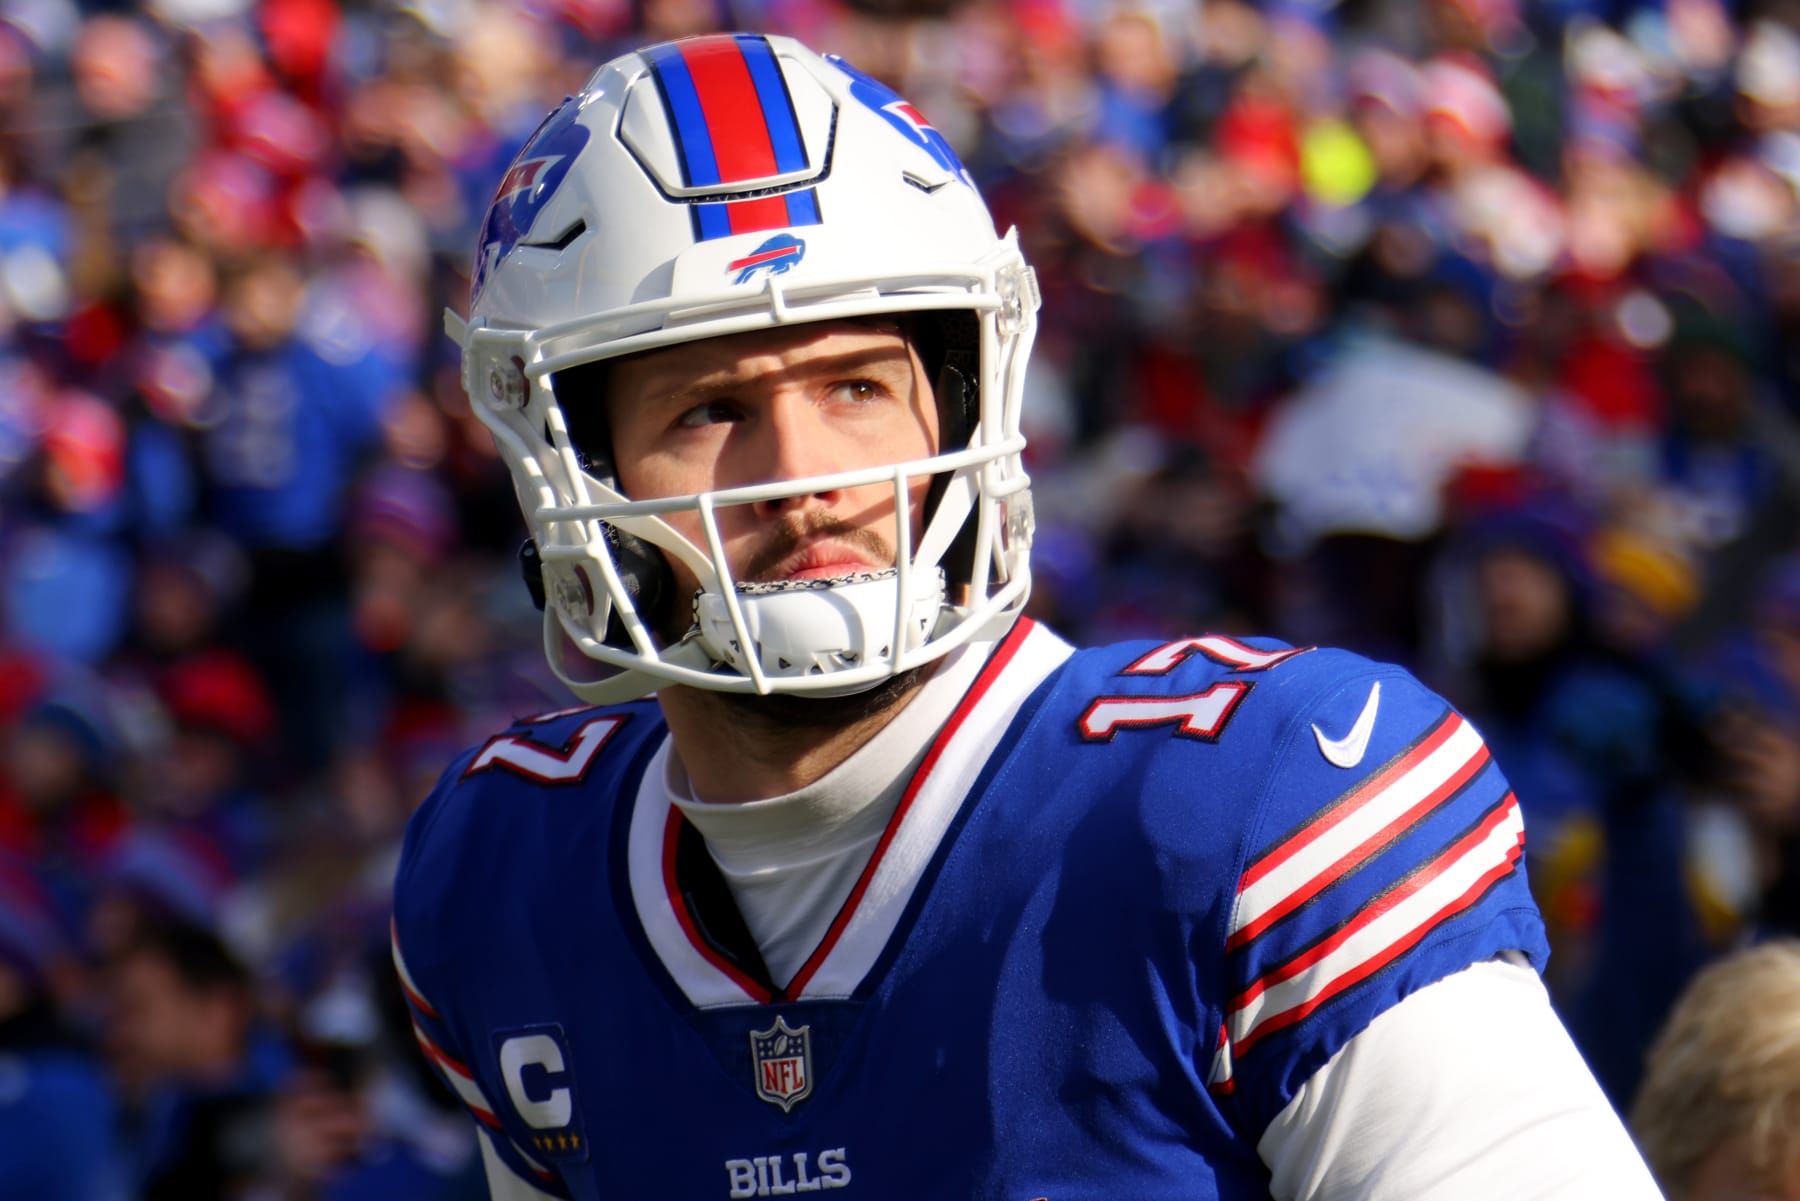 NFL Draft 2018: 'Scared for Josh Allen' if he winds up with Giants or Jets